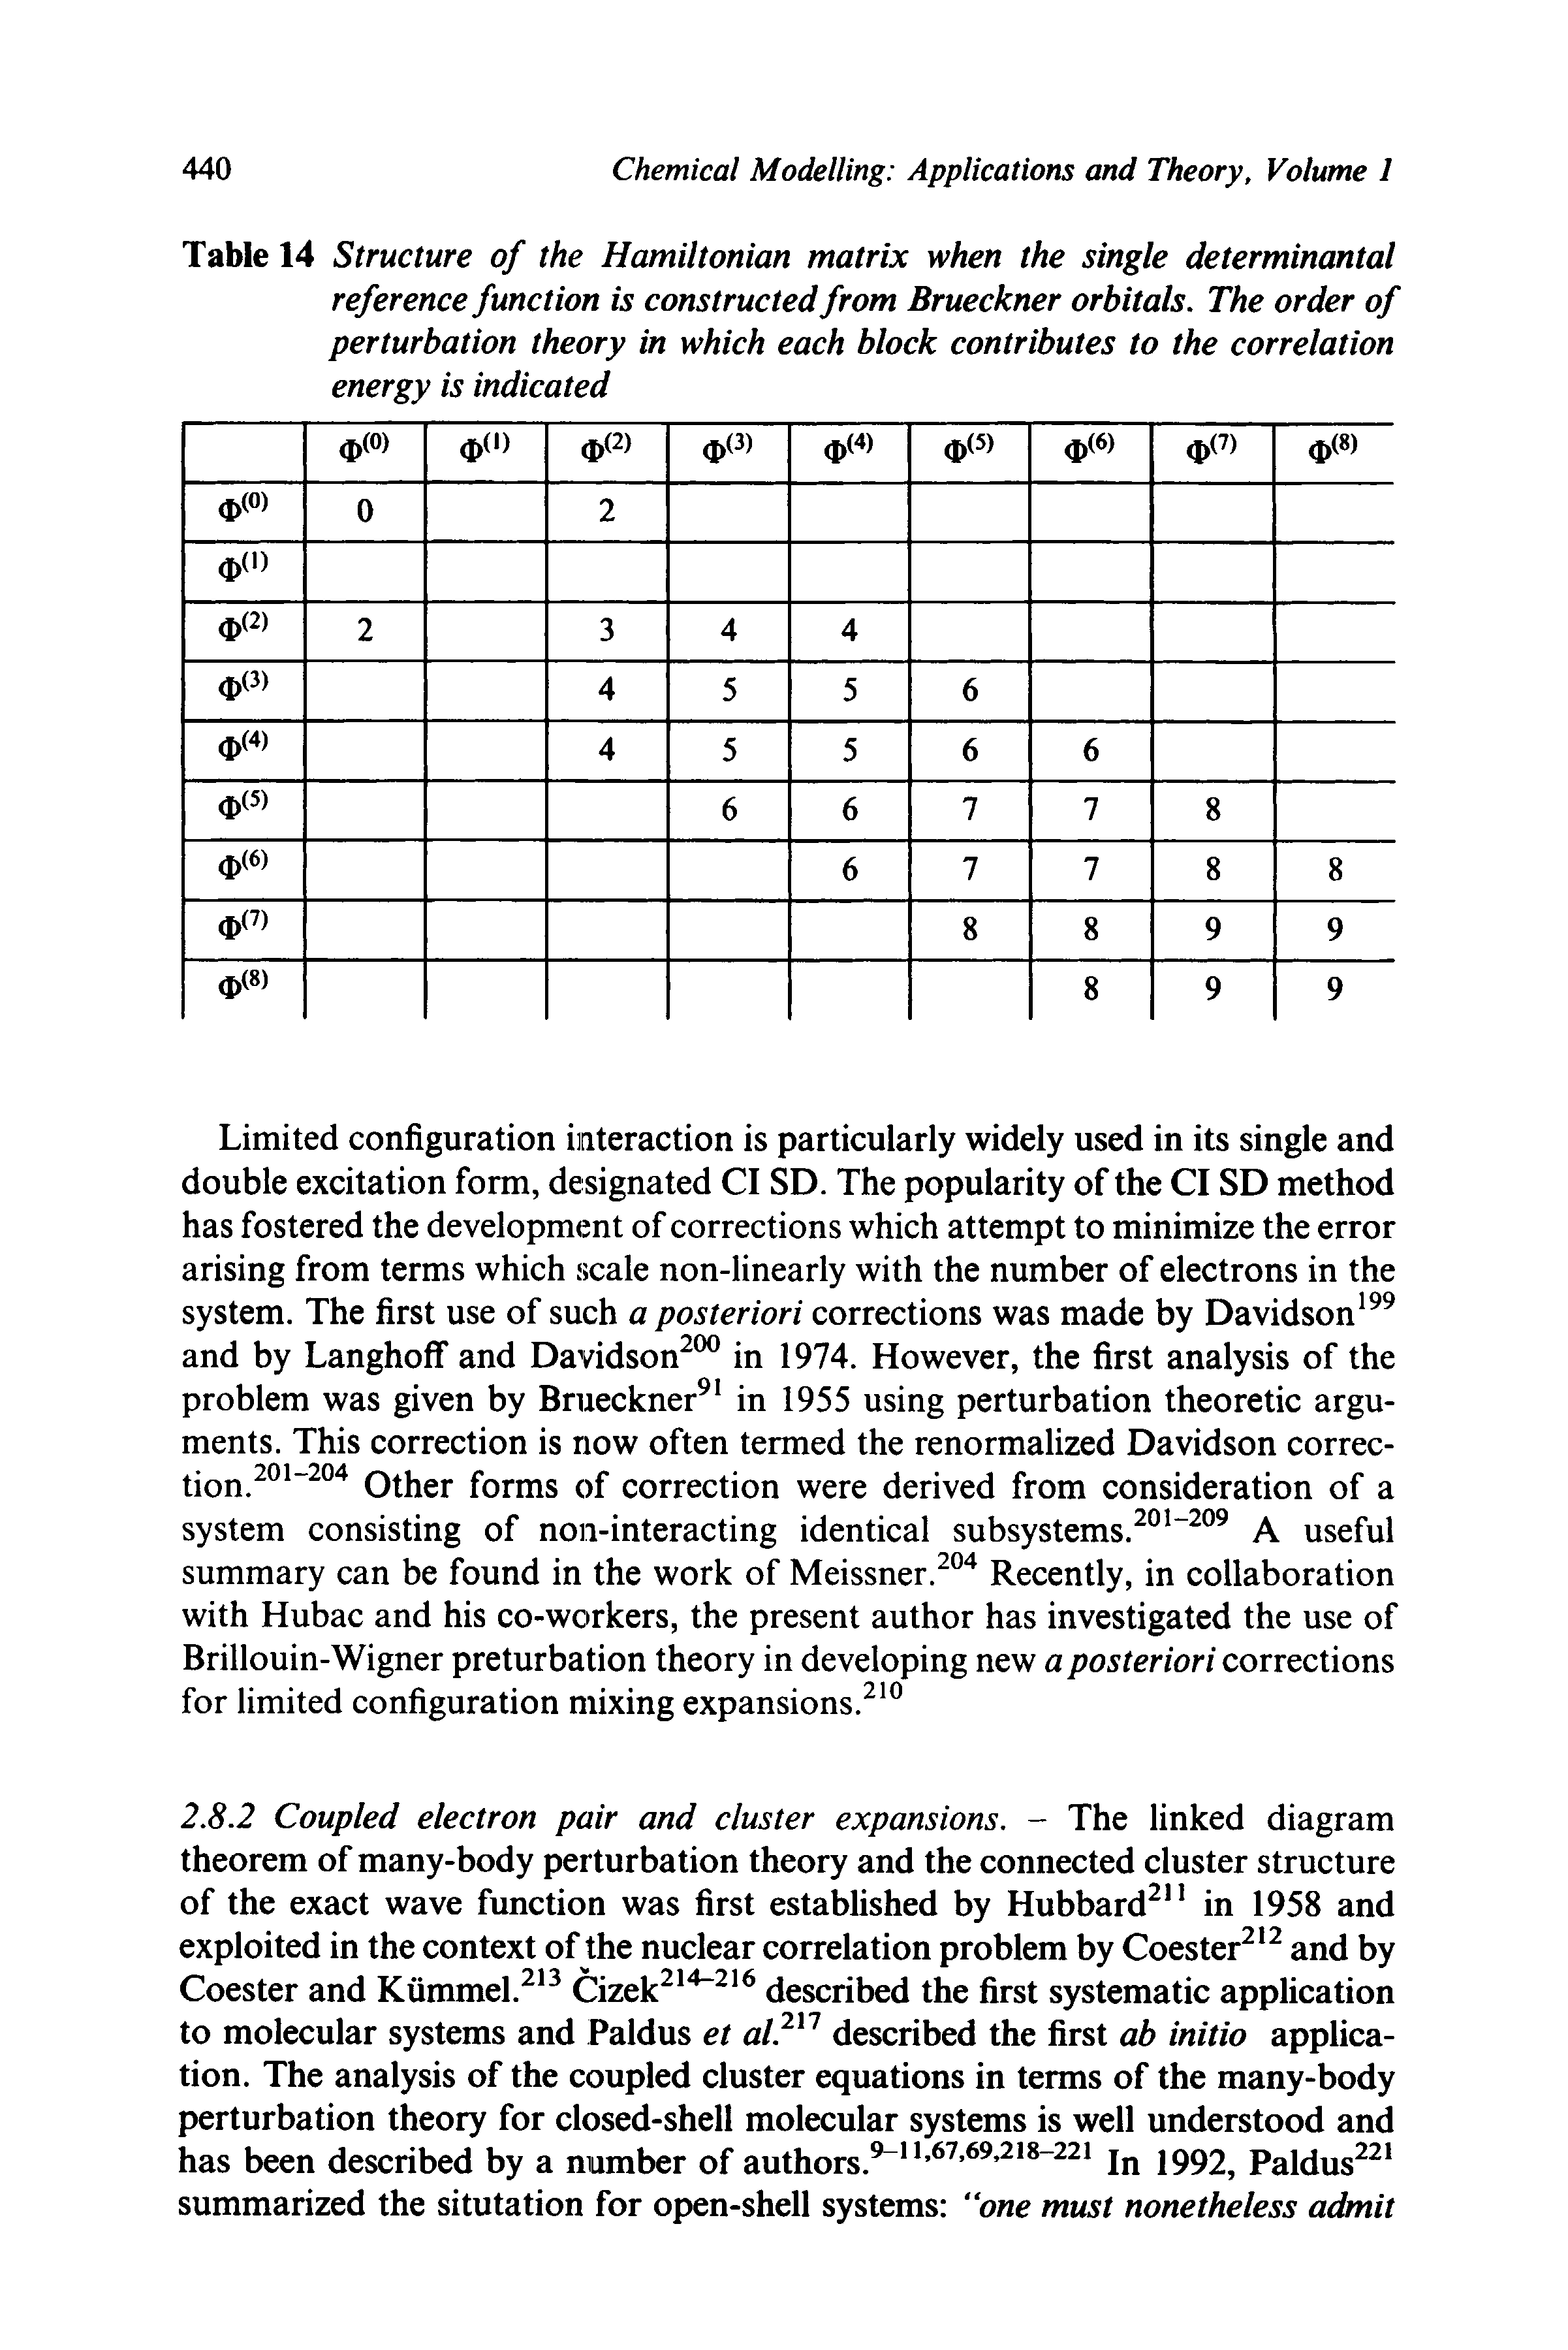 Table 14 Structure of the Hamiltonian matrix when the single determinantal reference function is constructed from Brueckner orbitals. The order of perturbation theory in which each block contributes to the correlation energy is indicated...